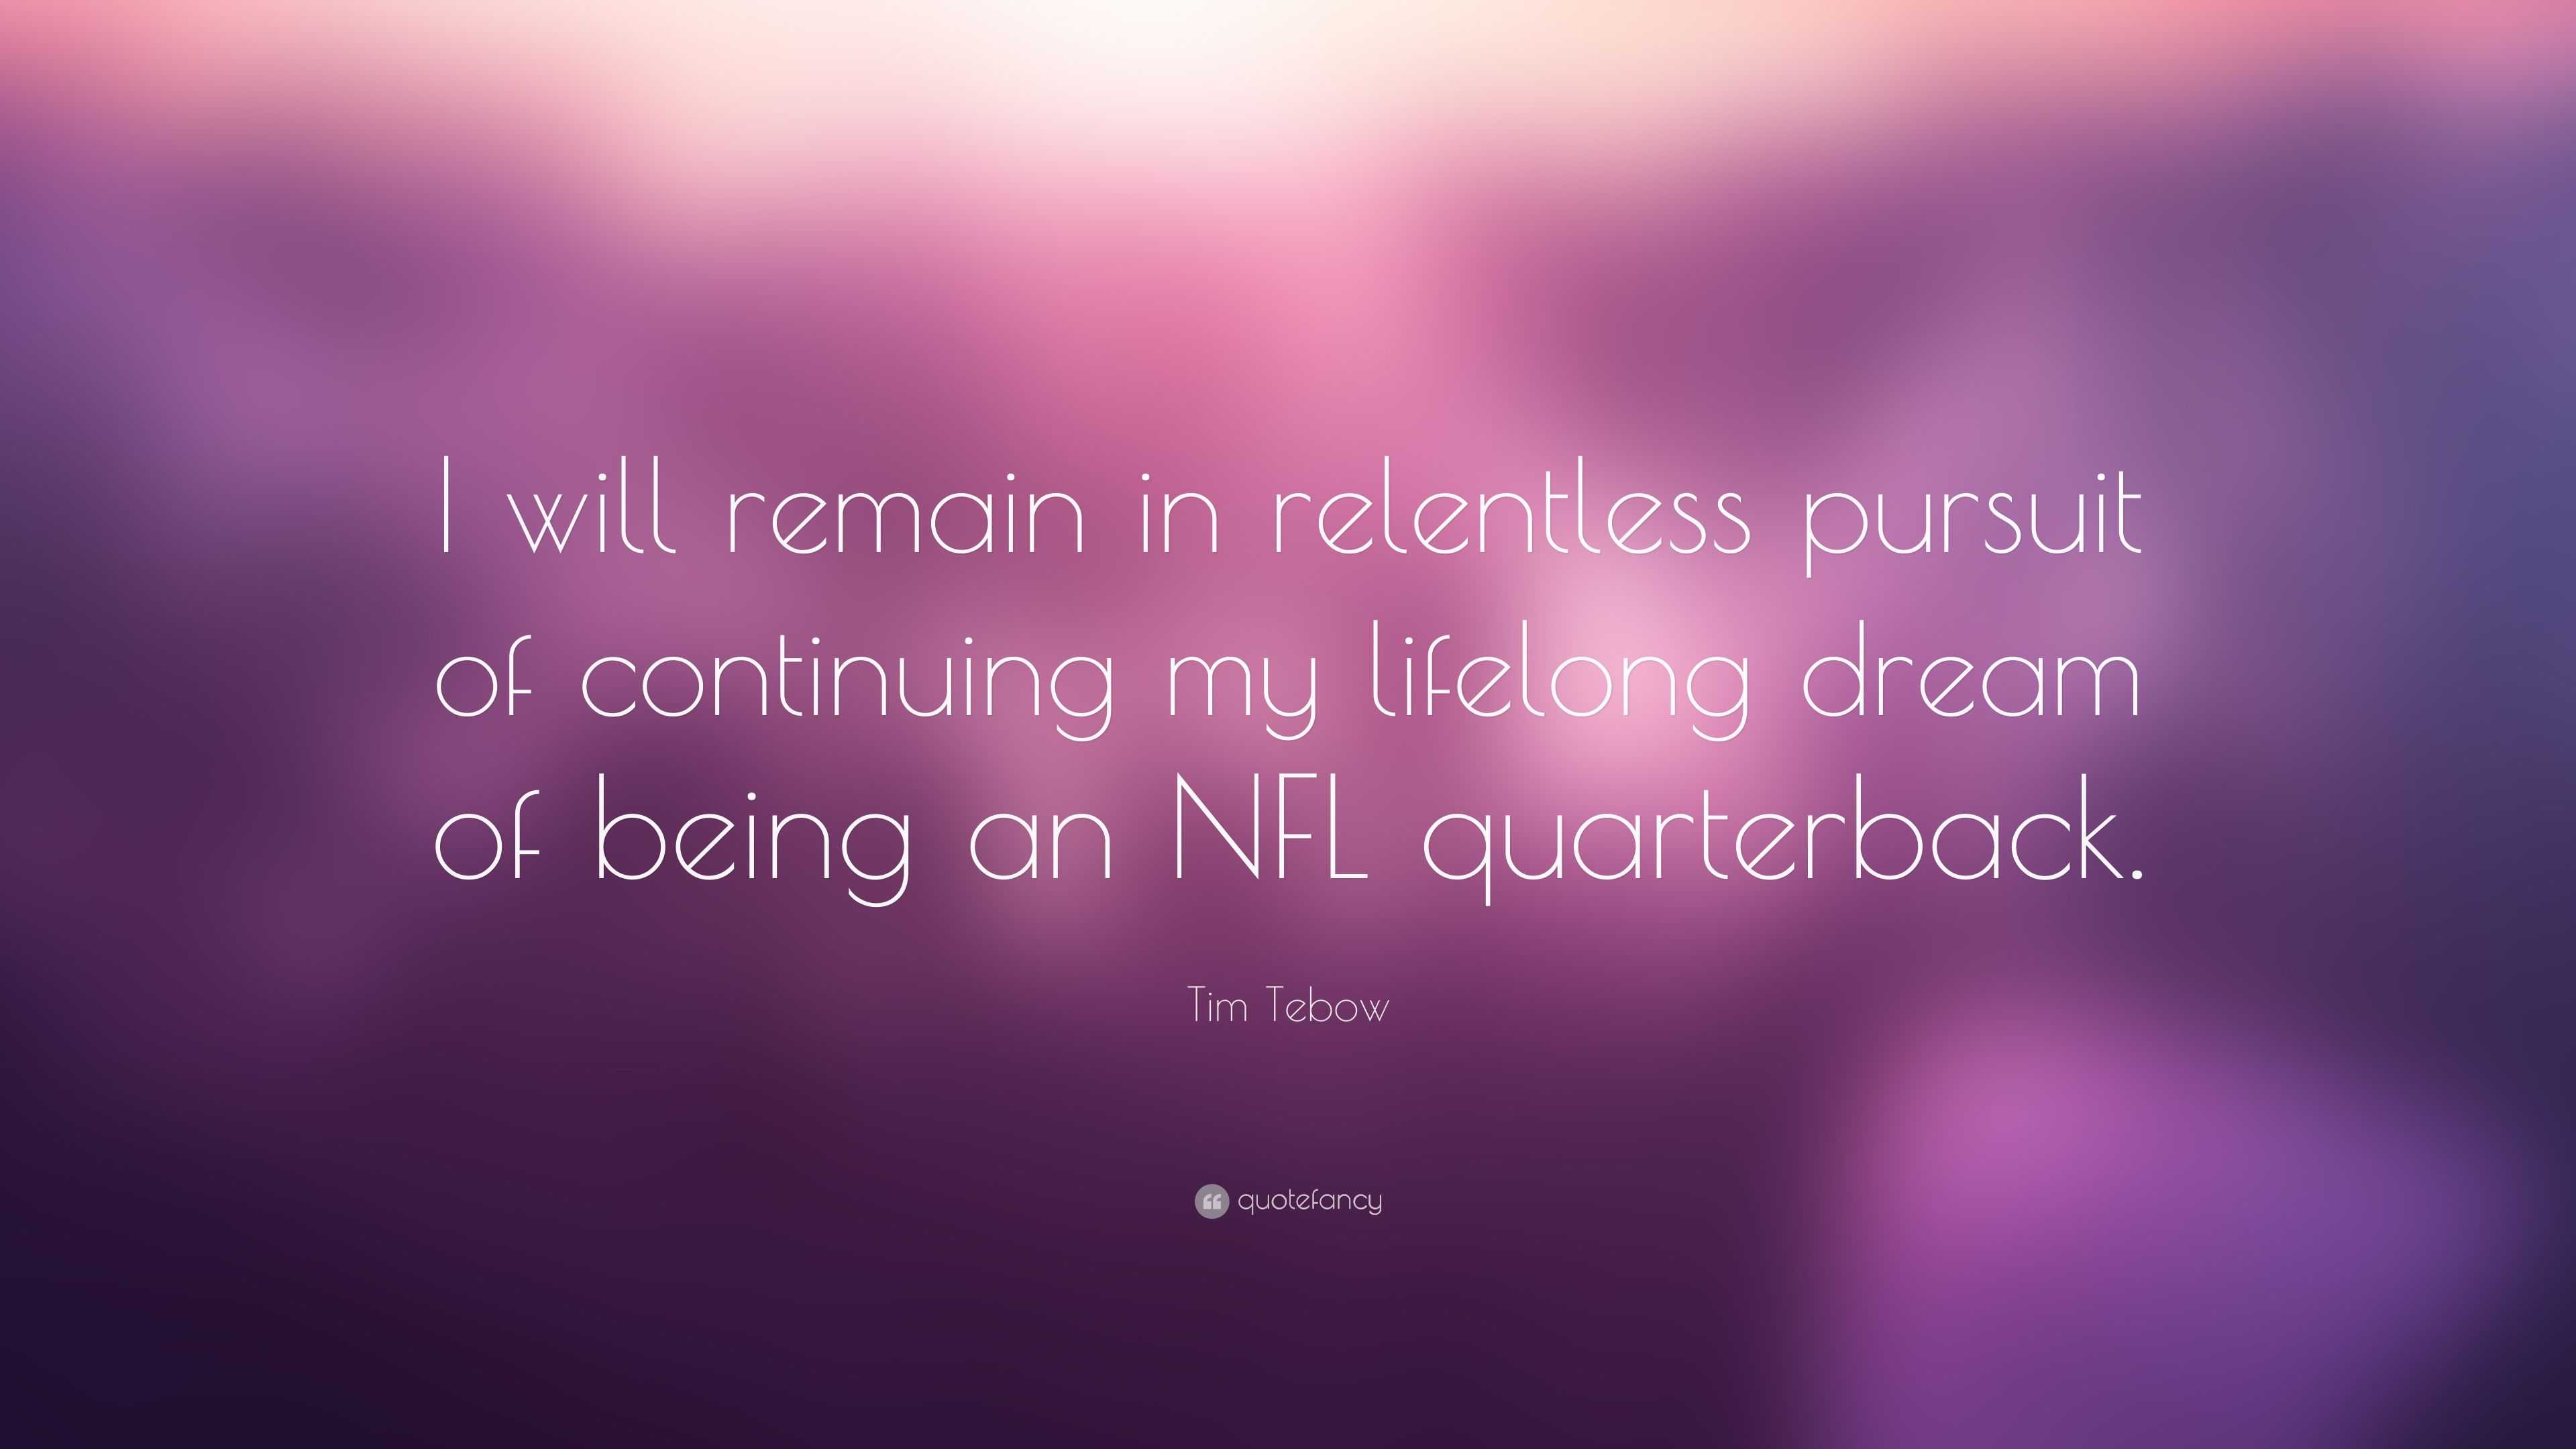 Tim Tebow Quote: “I will remain in relentless pursuit of continuing my